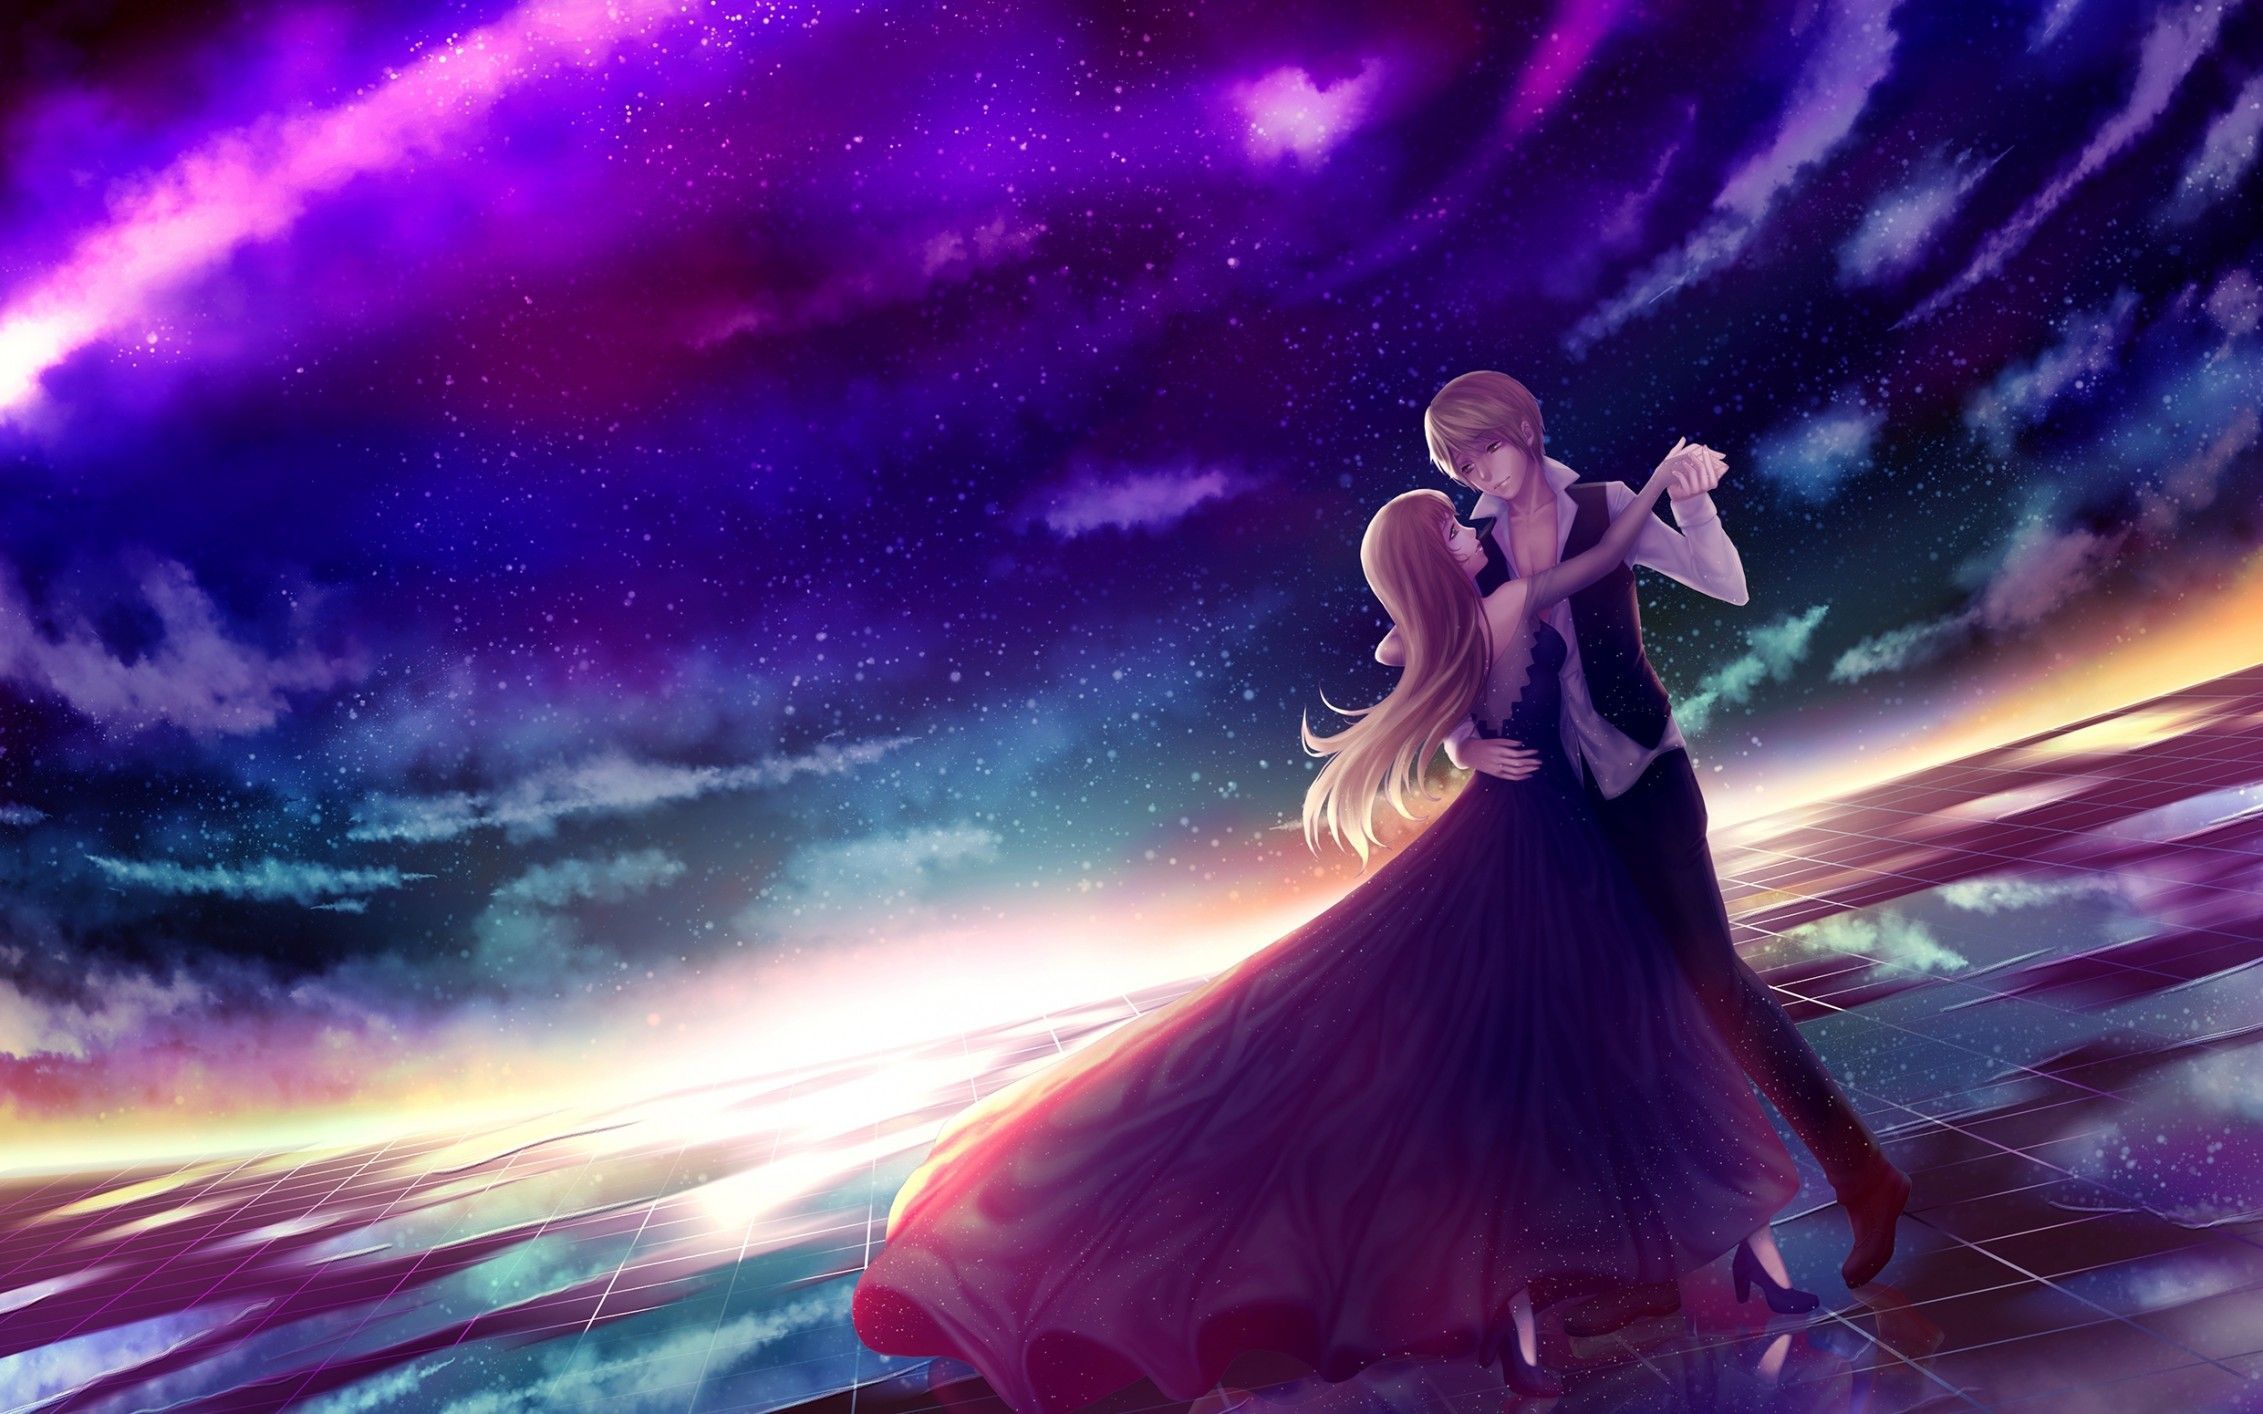 Romantic Animated Love Couple Wallpapers